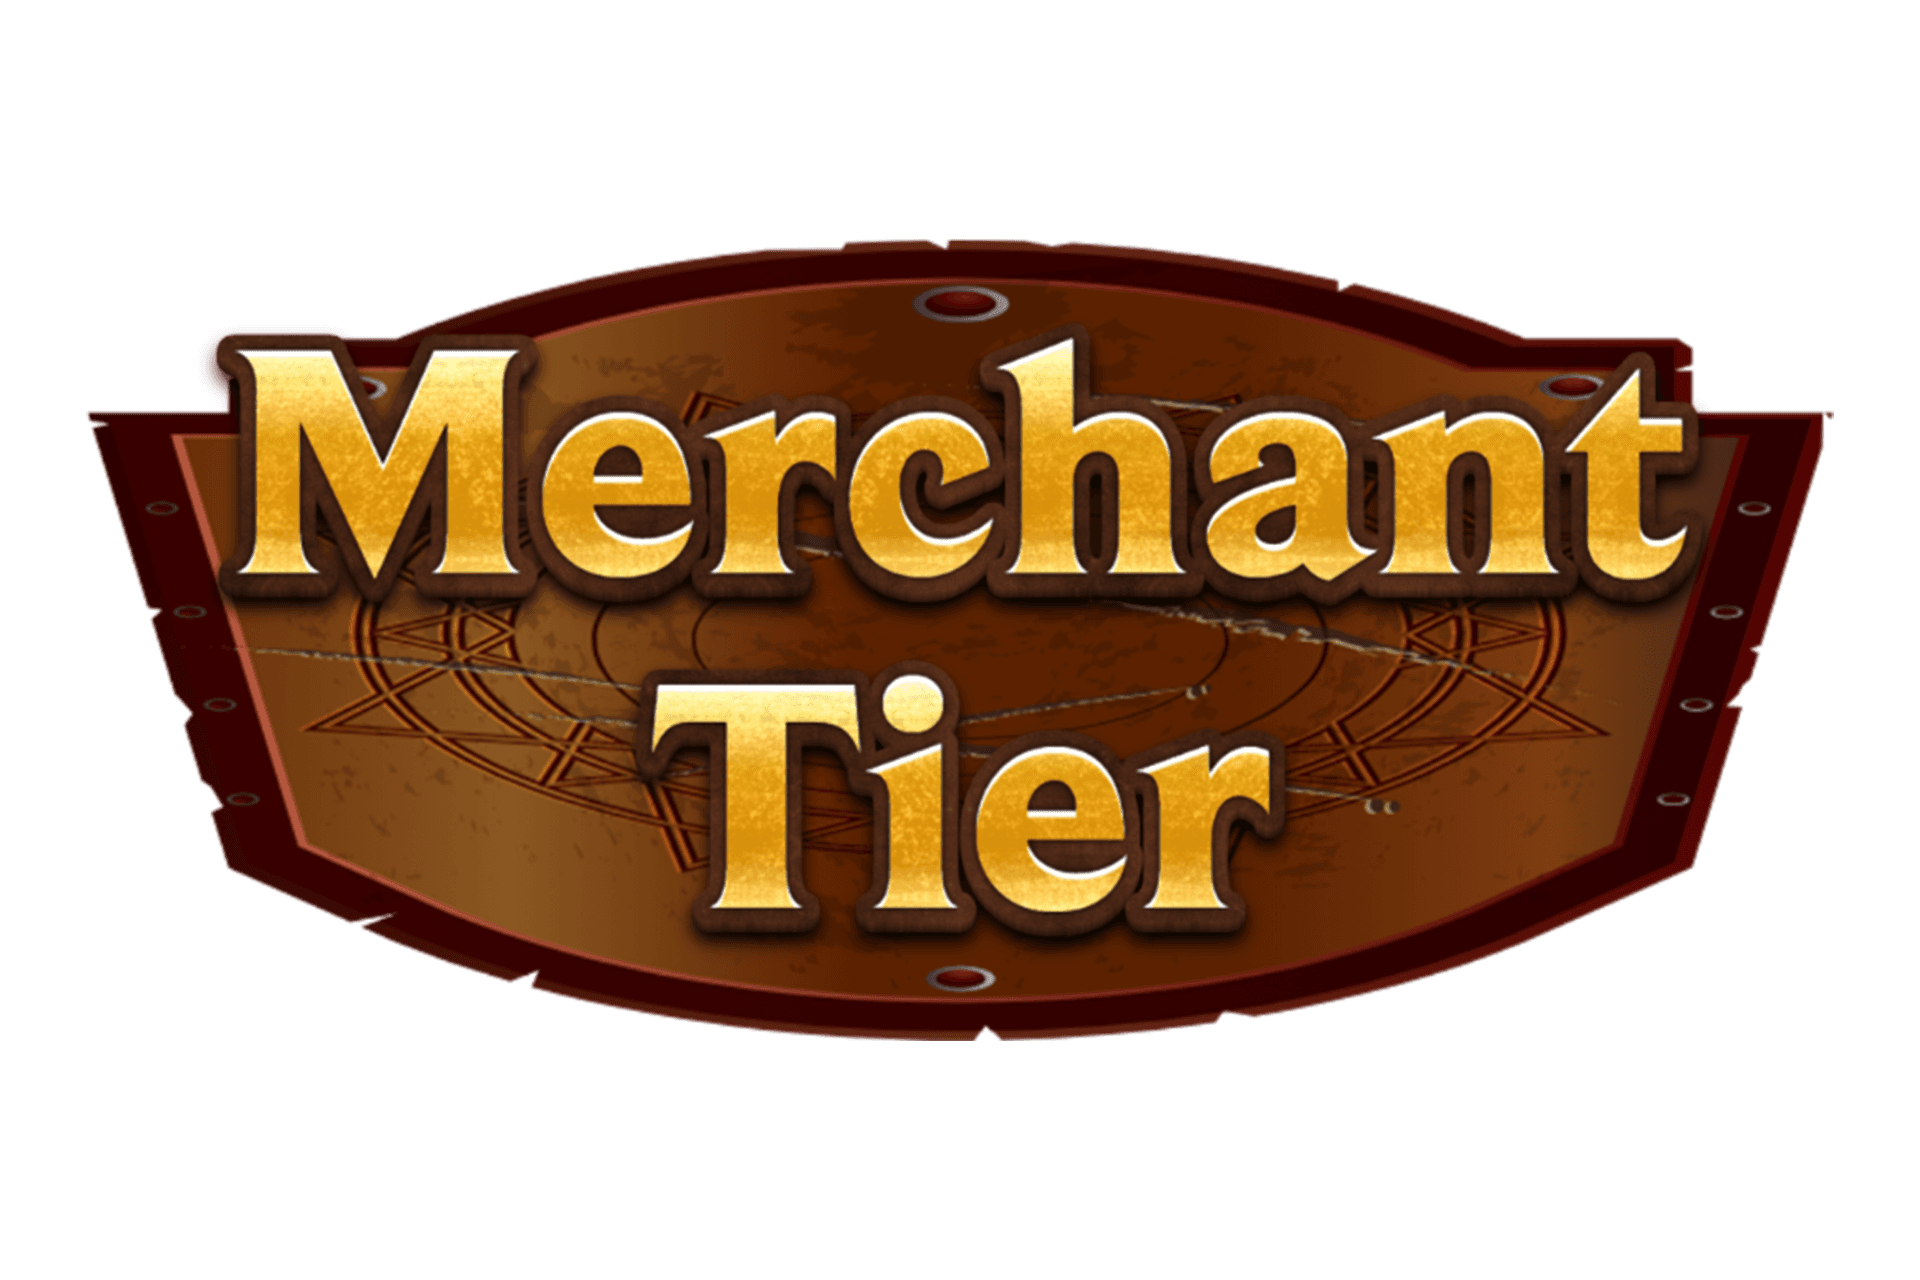 Merchant Tier - Make thangs your own way!